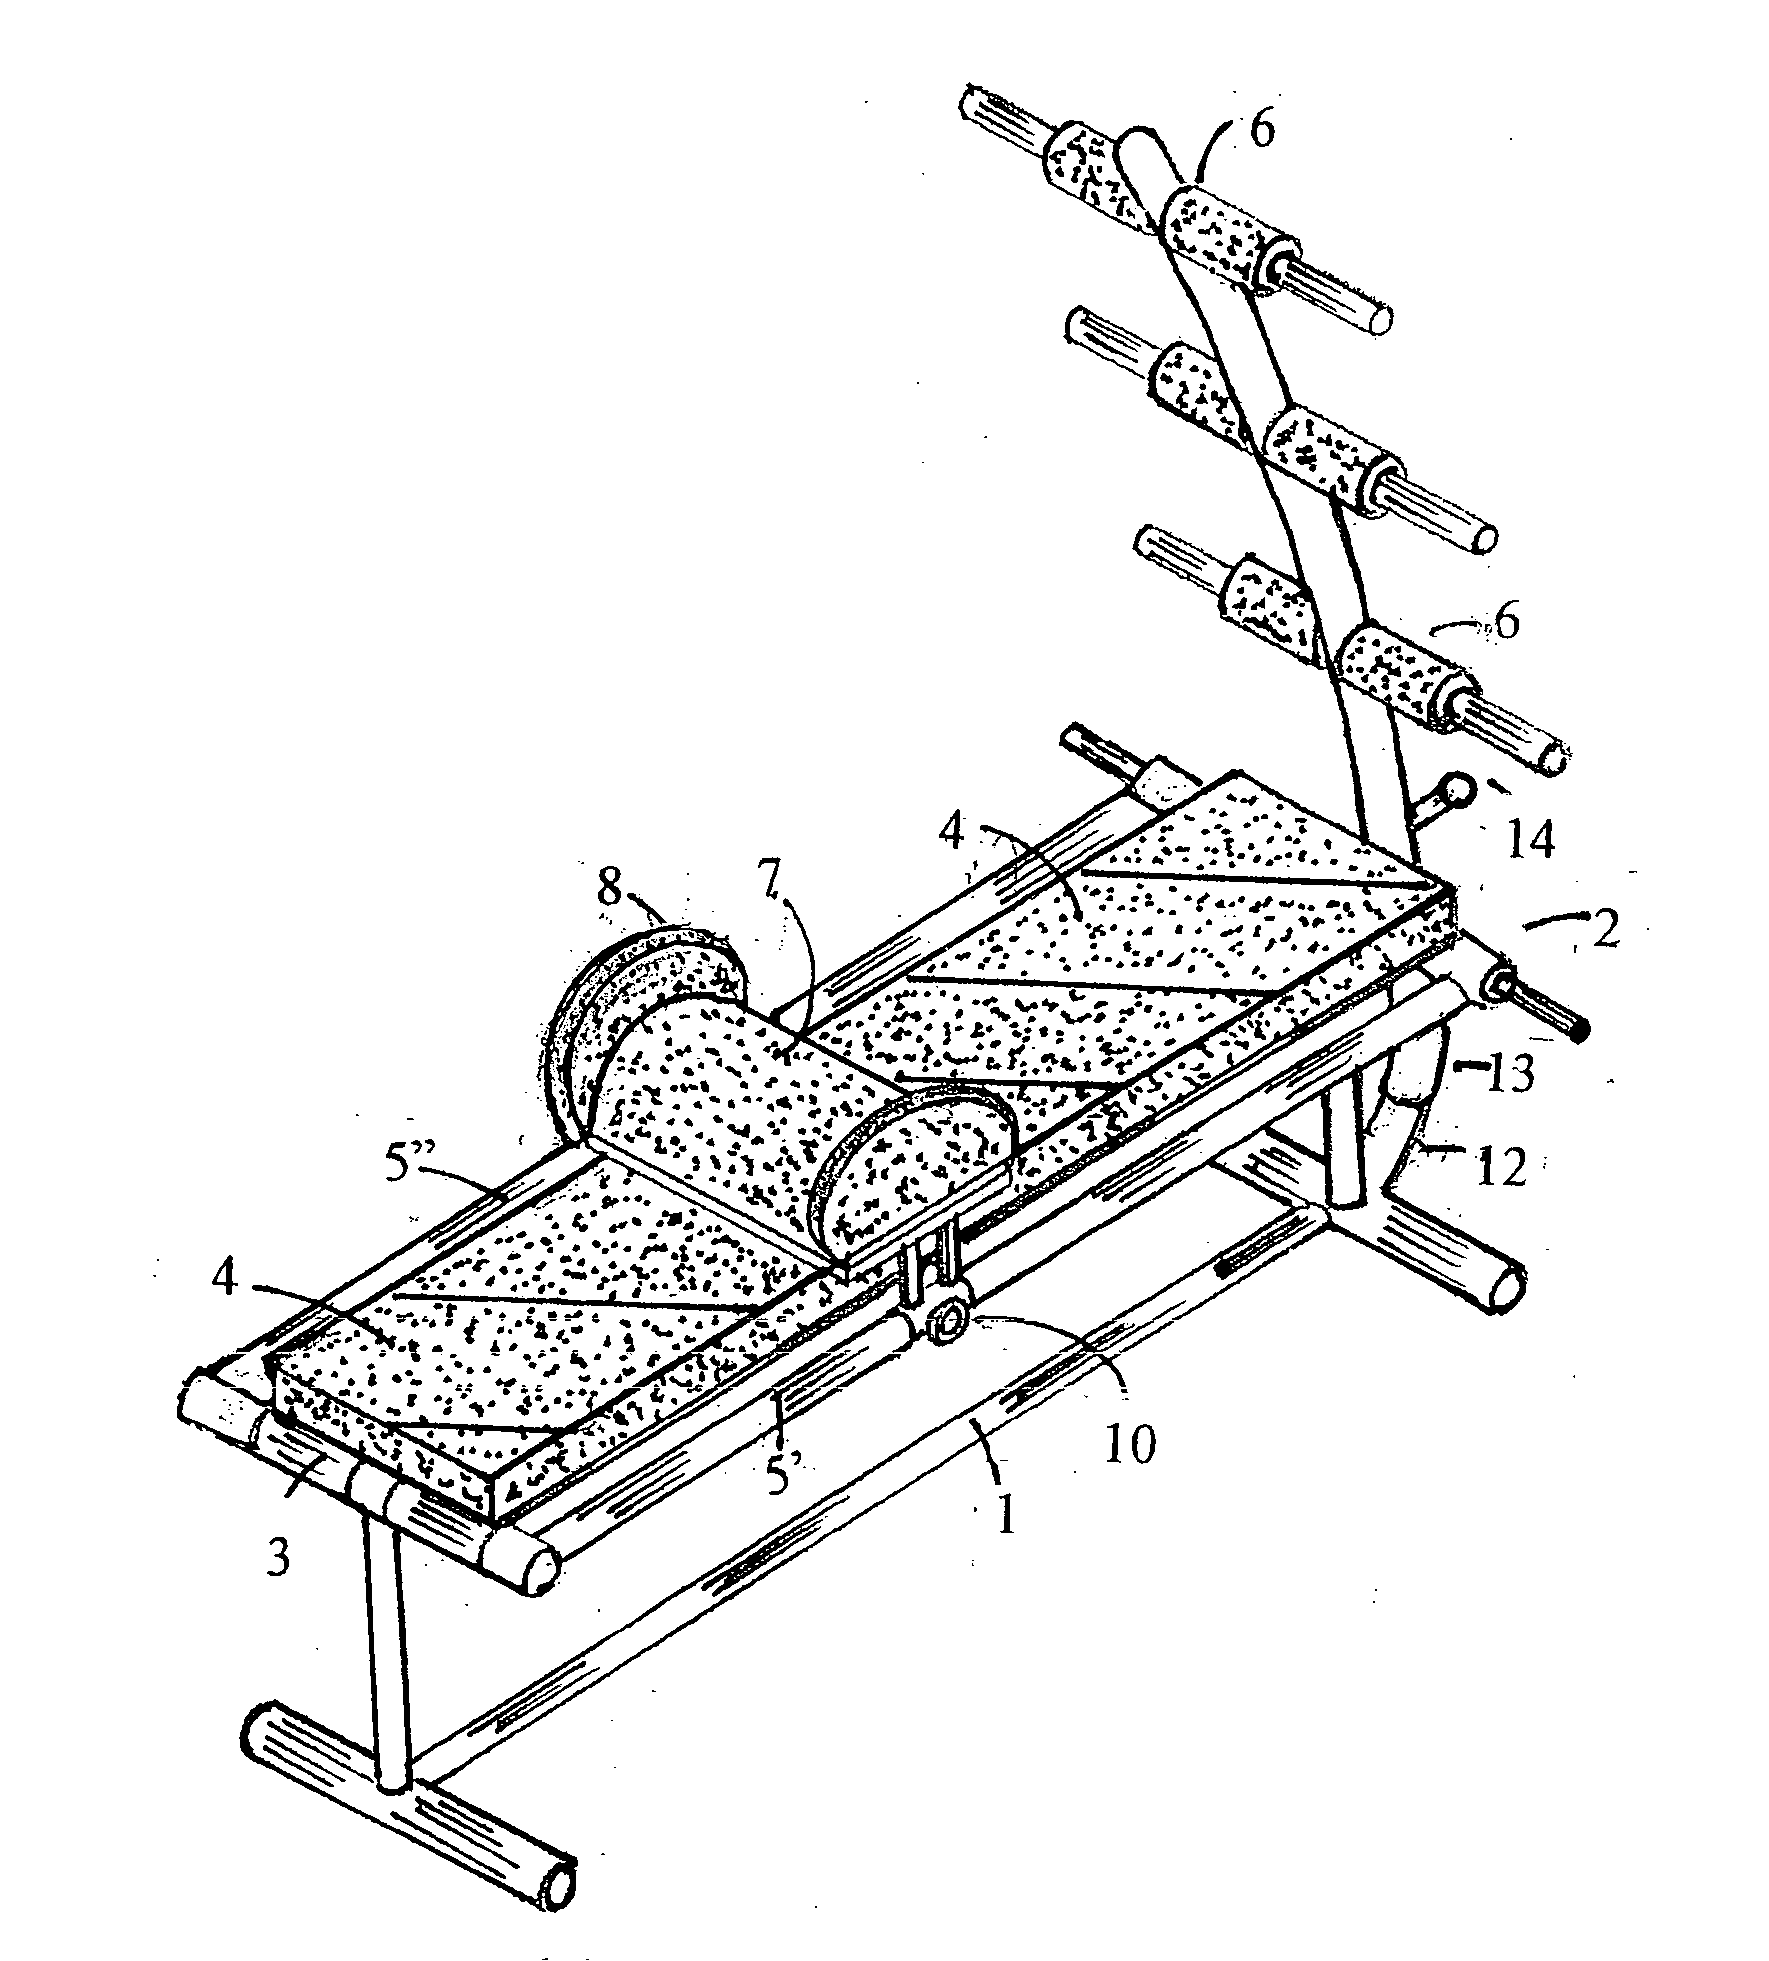 Biodynamic apparatus for performing correct SIT-UP and LEGS-UP exercises and methods